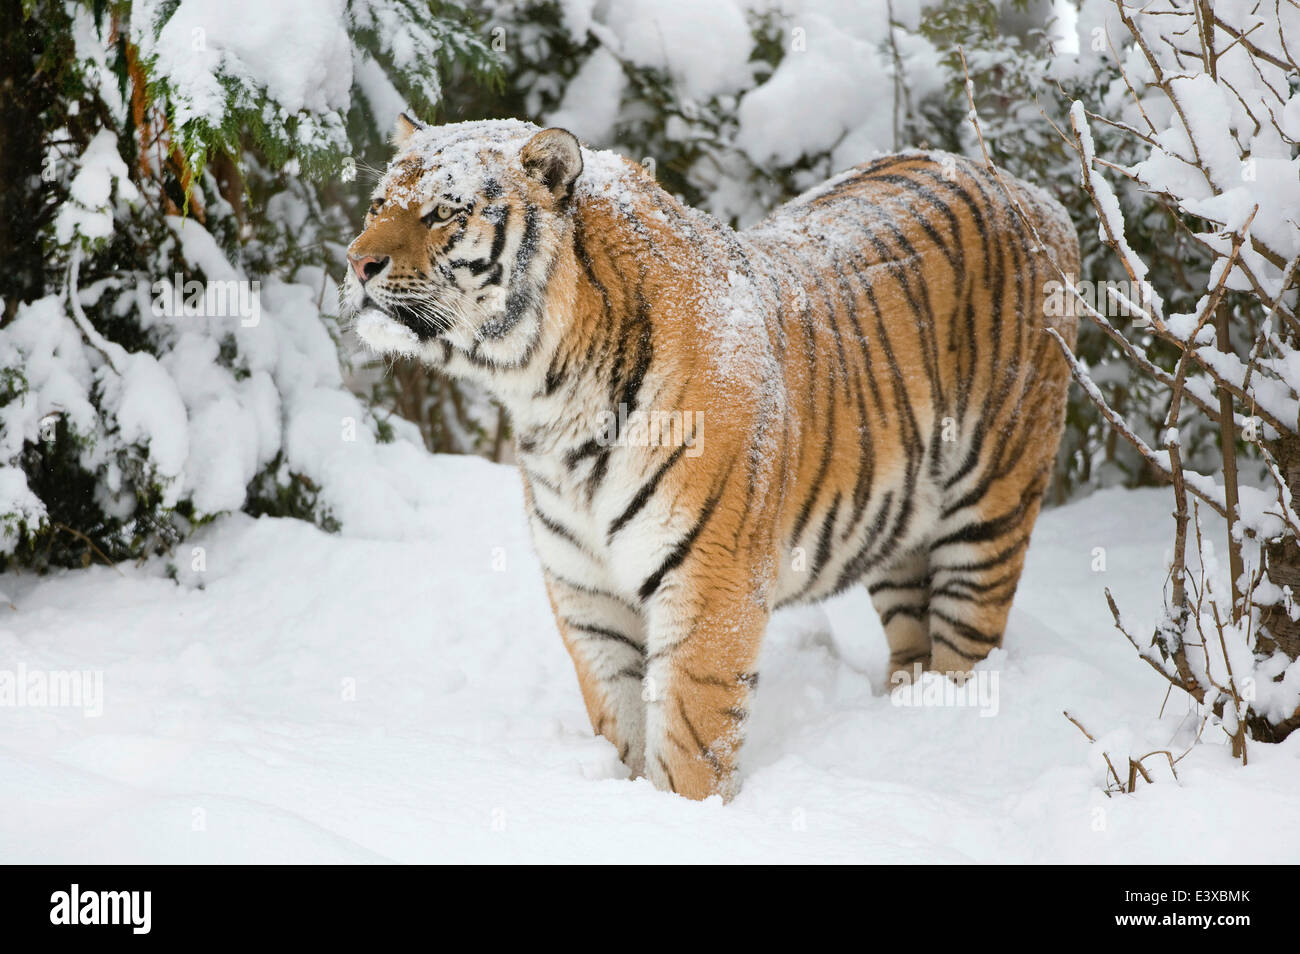 Siberian Tiger or Amur Tiger (Panthera tigris altaica), standing in snow, captive, Saxony, Germany Stock Photo